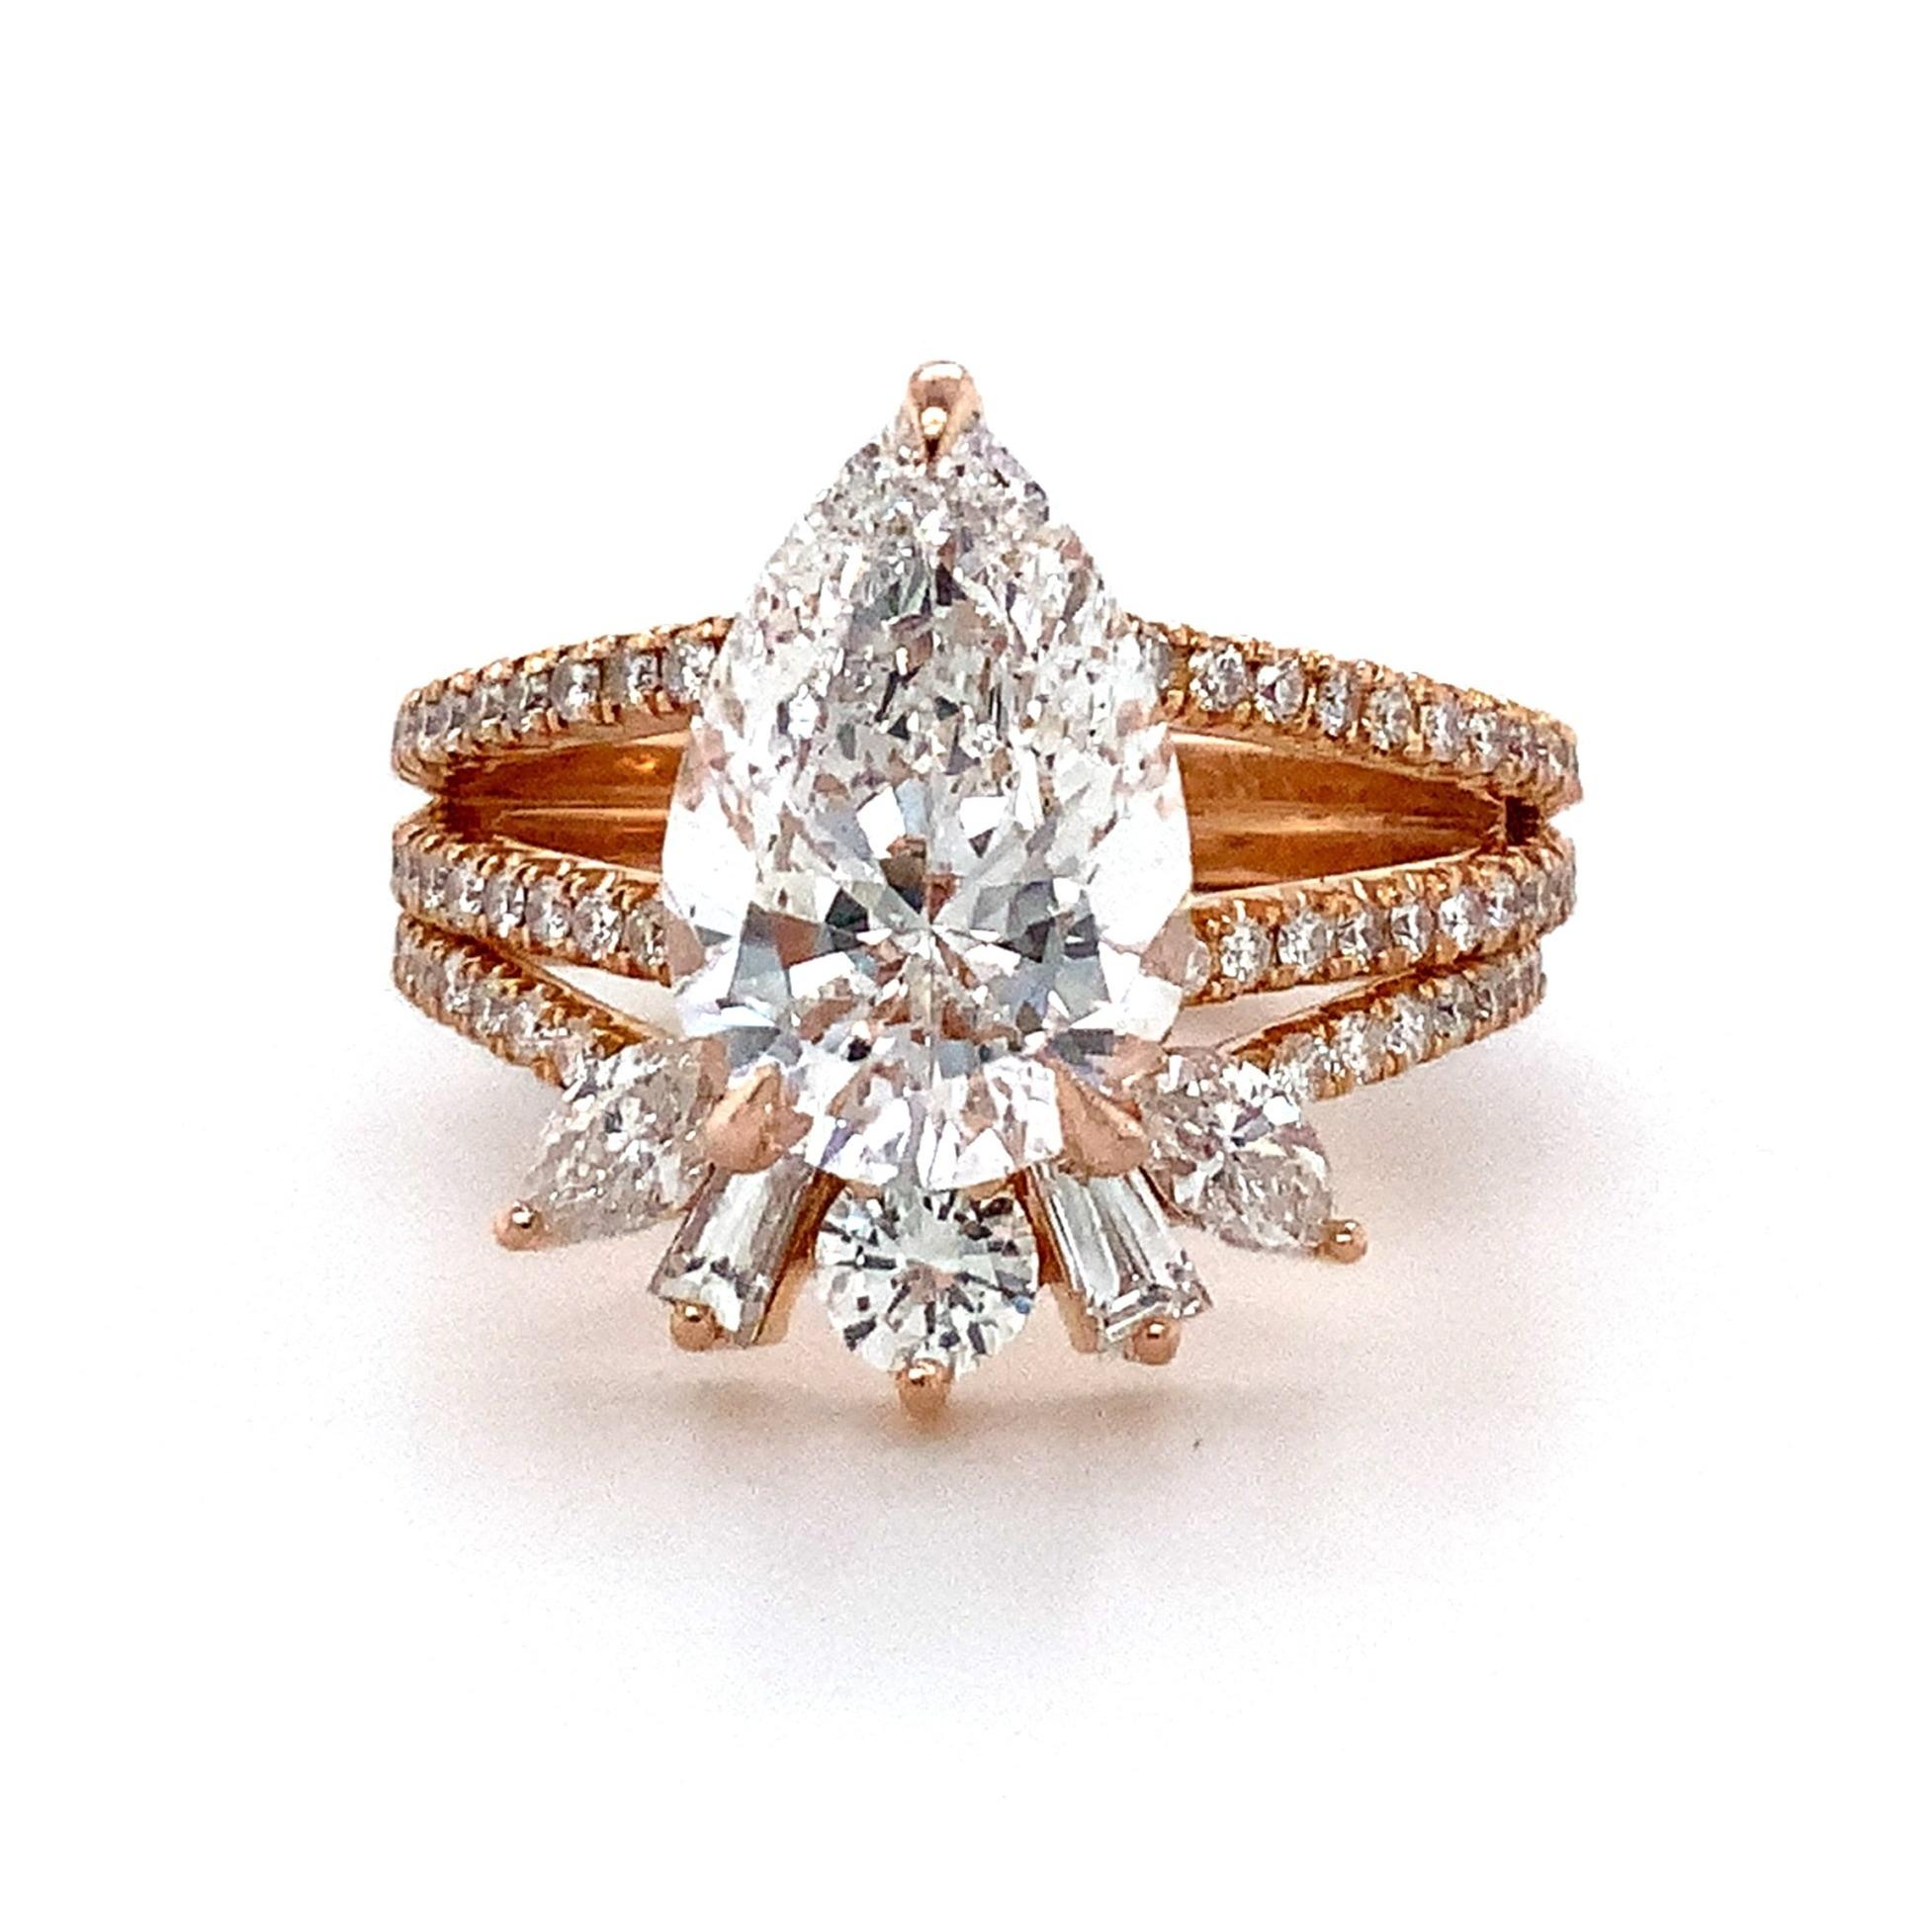 This breathtaking Hidden Halo Split Shank Ring showcases a 2.82 ct. pear-shaped Diamond and comes equipped with a GIA-certified laser inscription and report # 5201547333 (see lab report). With its split shank design and hidden halo, this Ring's